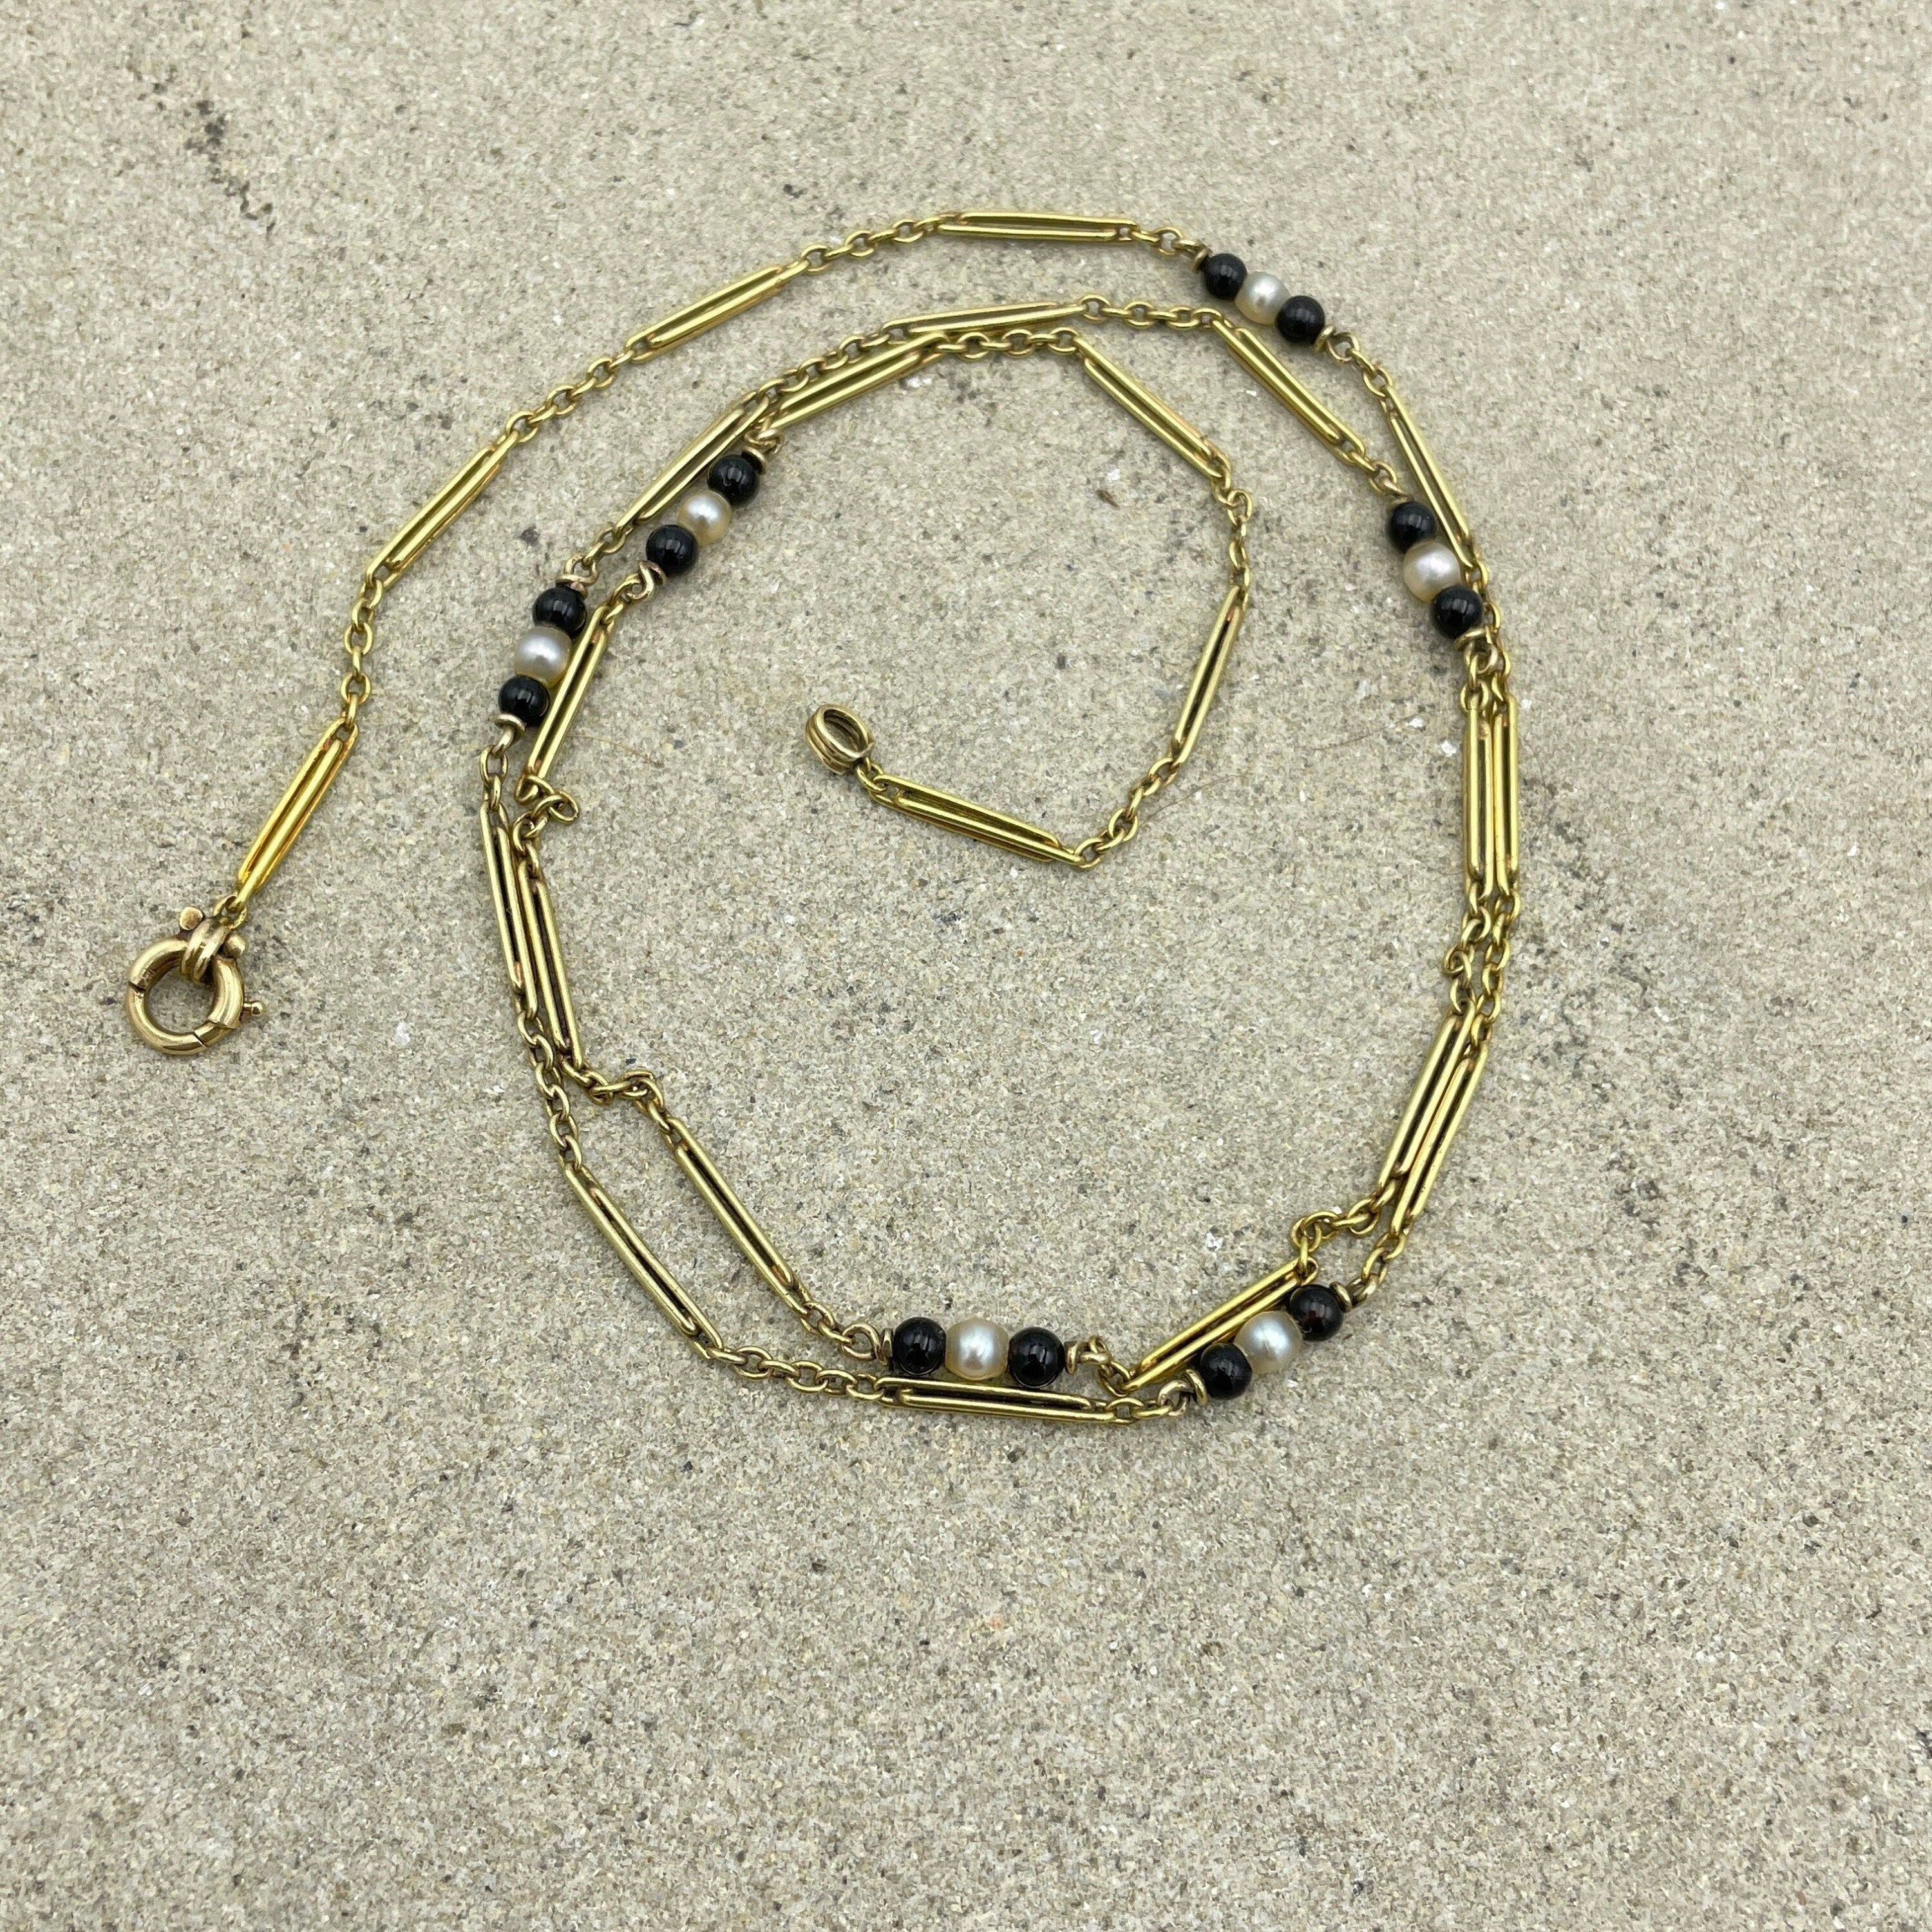 Antique 14ct Gold, Pearl & Black Onyx Bead Fancy Link Chain Necklace